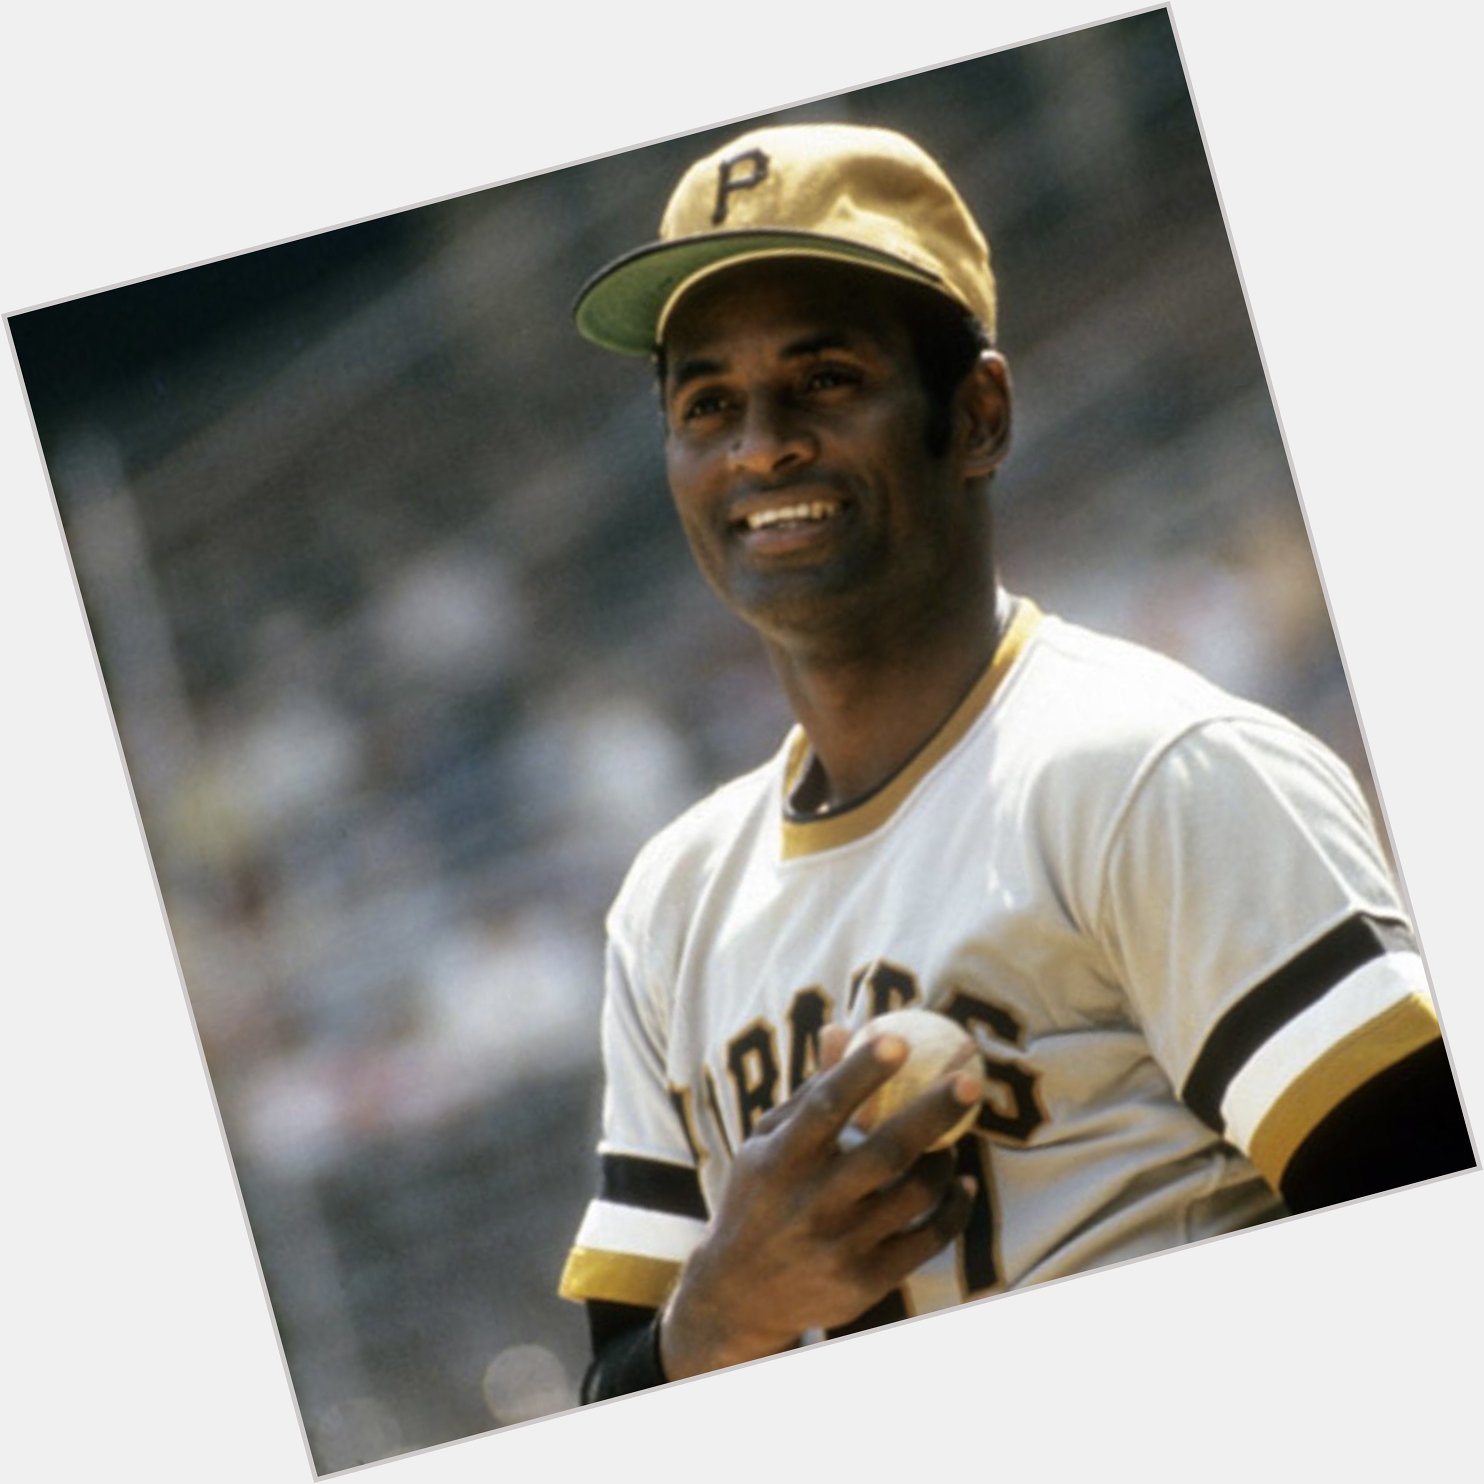 Happy birthday to baseball legend and hero, Roberto Clemente! He would have been 83 today. 